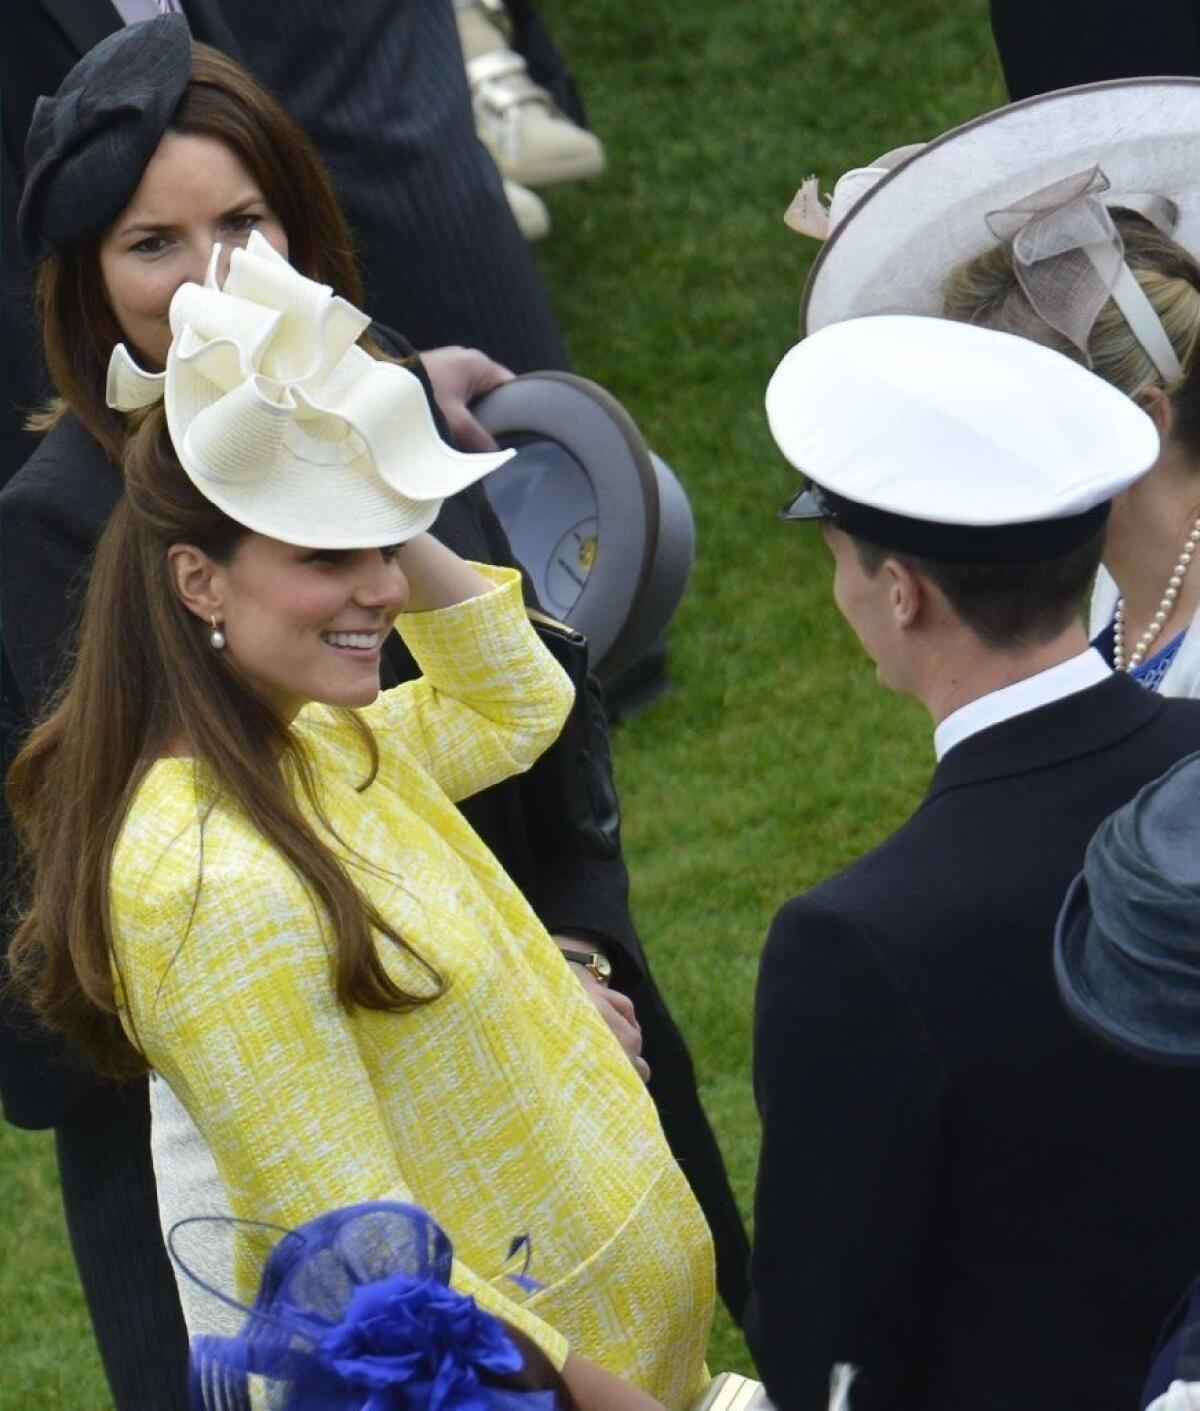 Her royal highness the Duchess of Cambridge, the former Kate Middleton, at a Buckingham Palace garden party, in full maternity mode. Boy or girl, the child will become the future monarch.